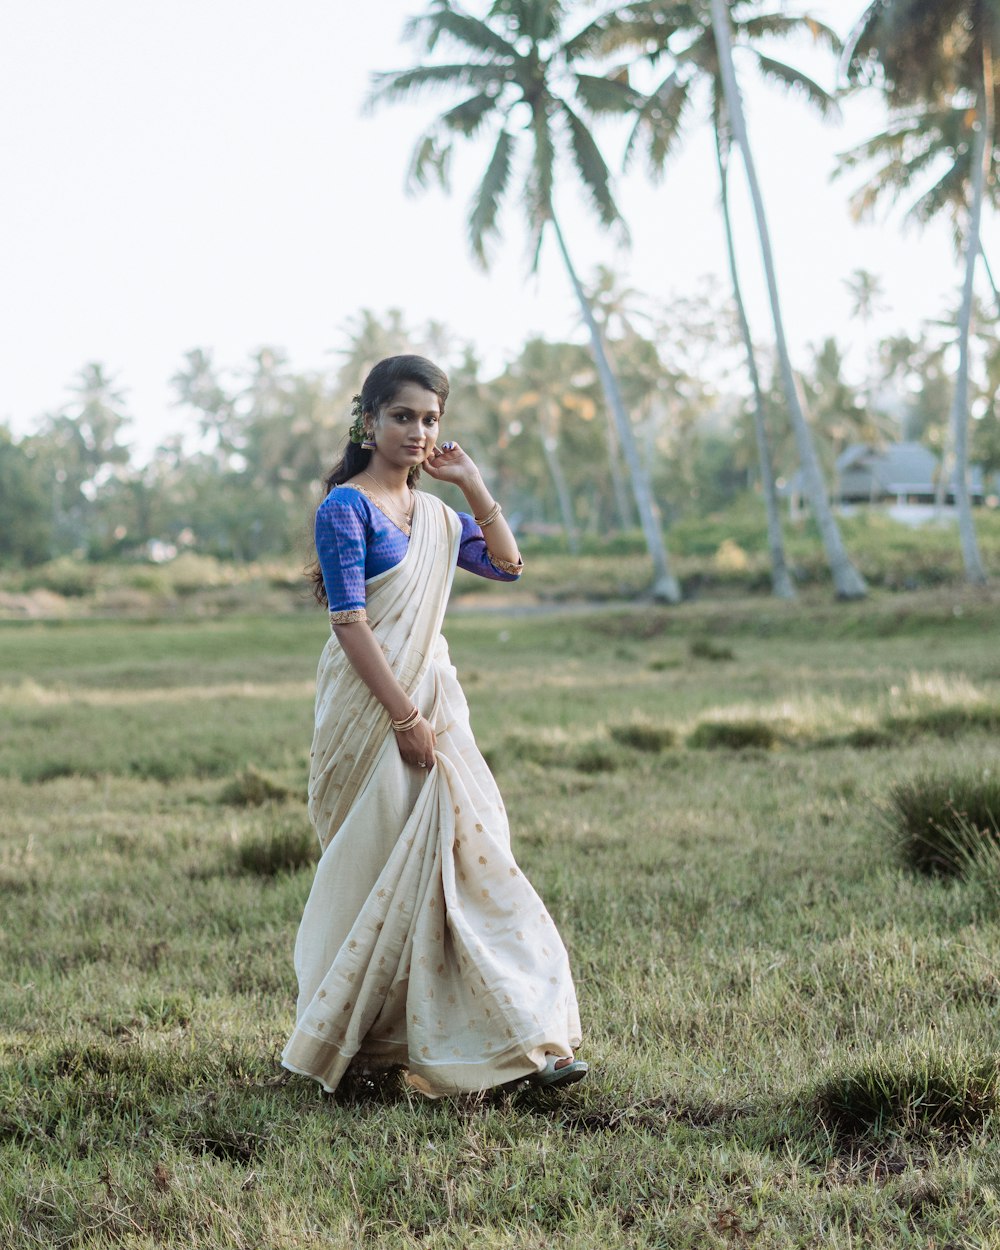 a woman in a white and blue sari standing in a field